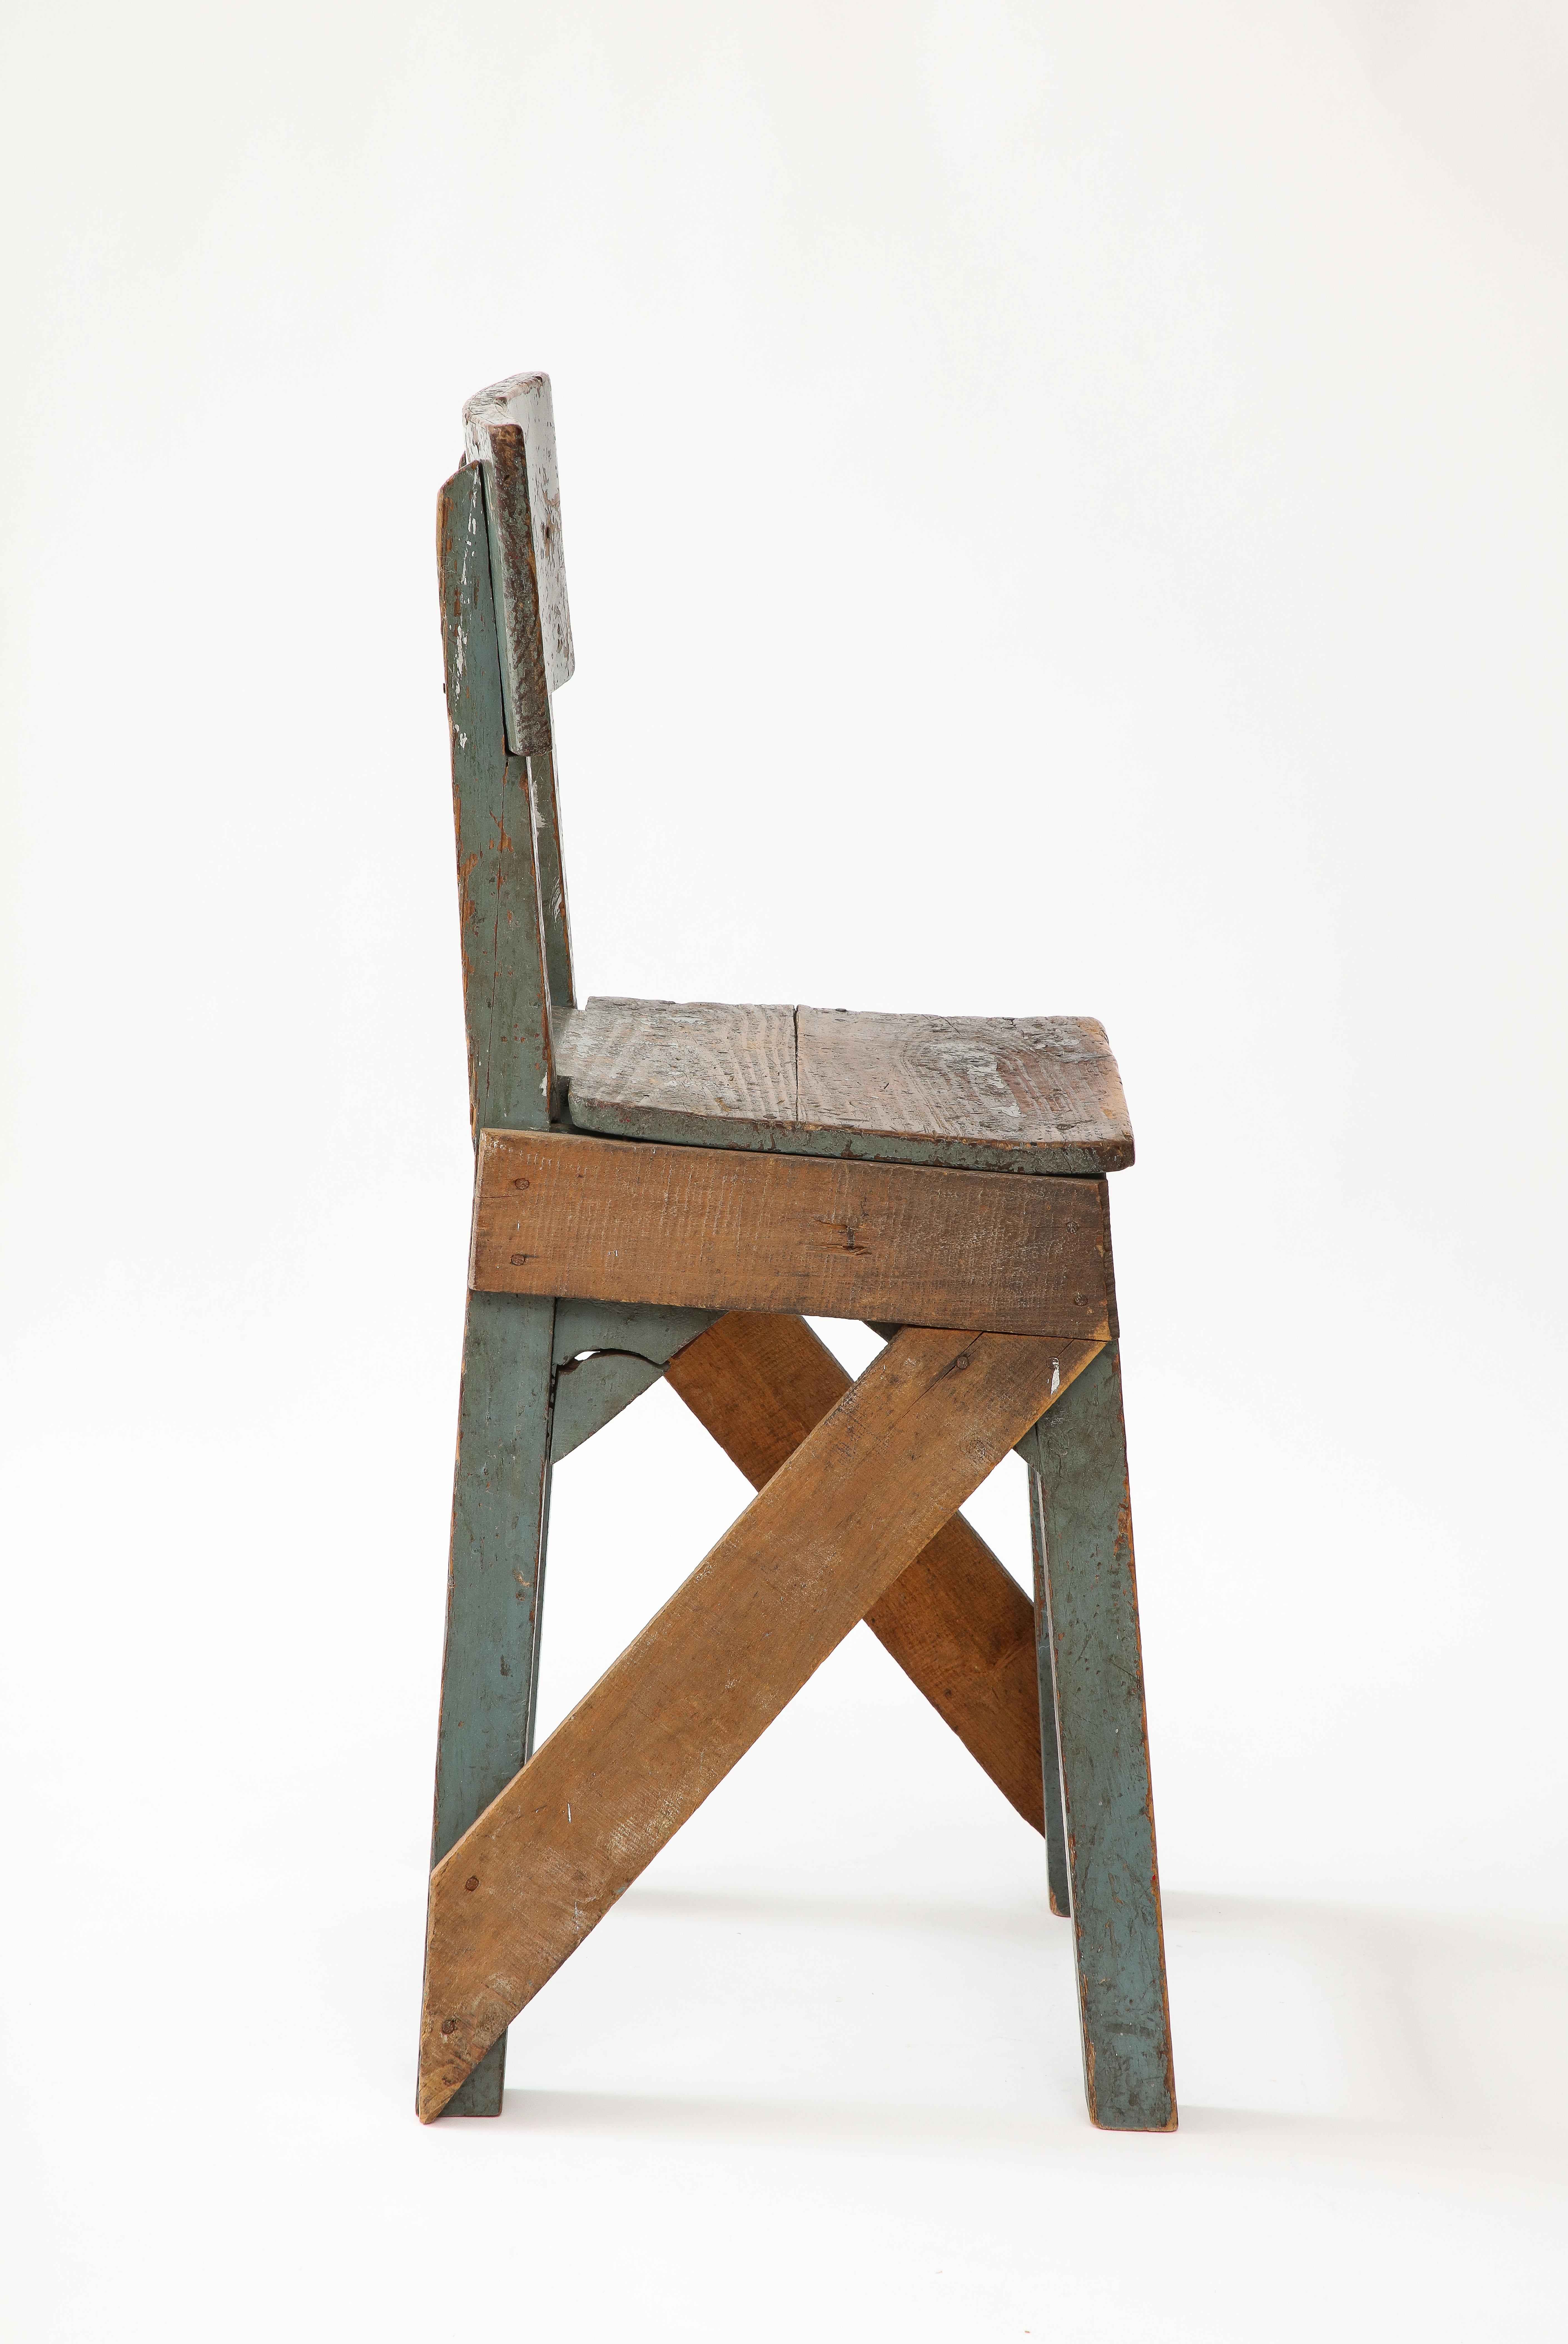 French Primitive Artist’s Chair, c. 1950 For Sale 7